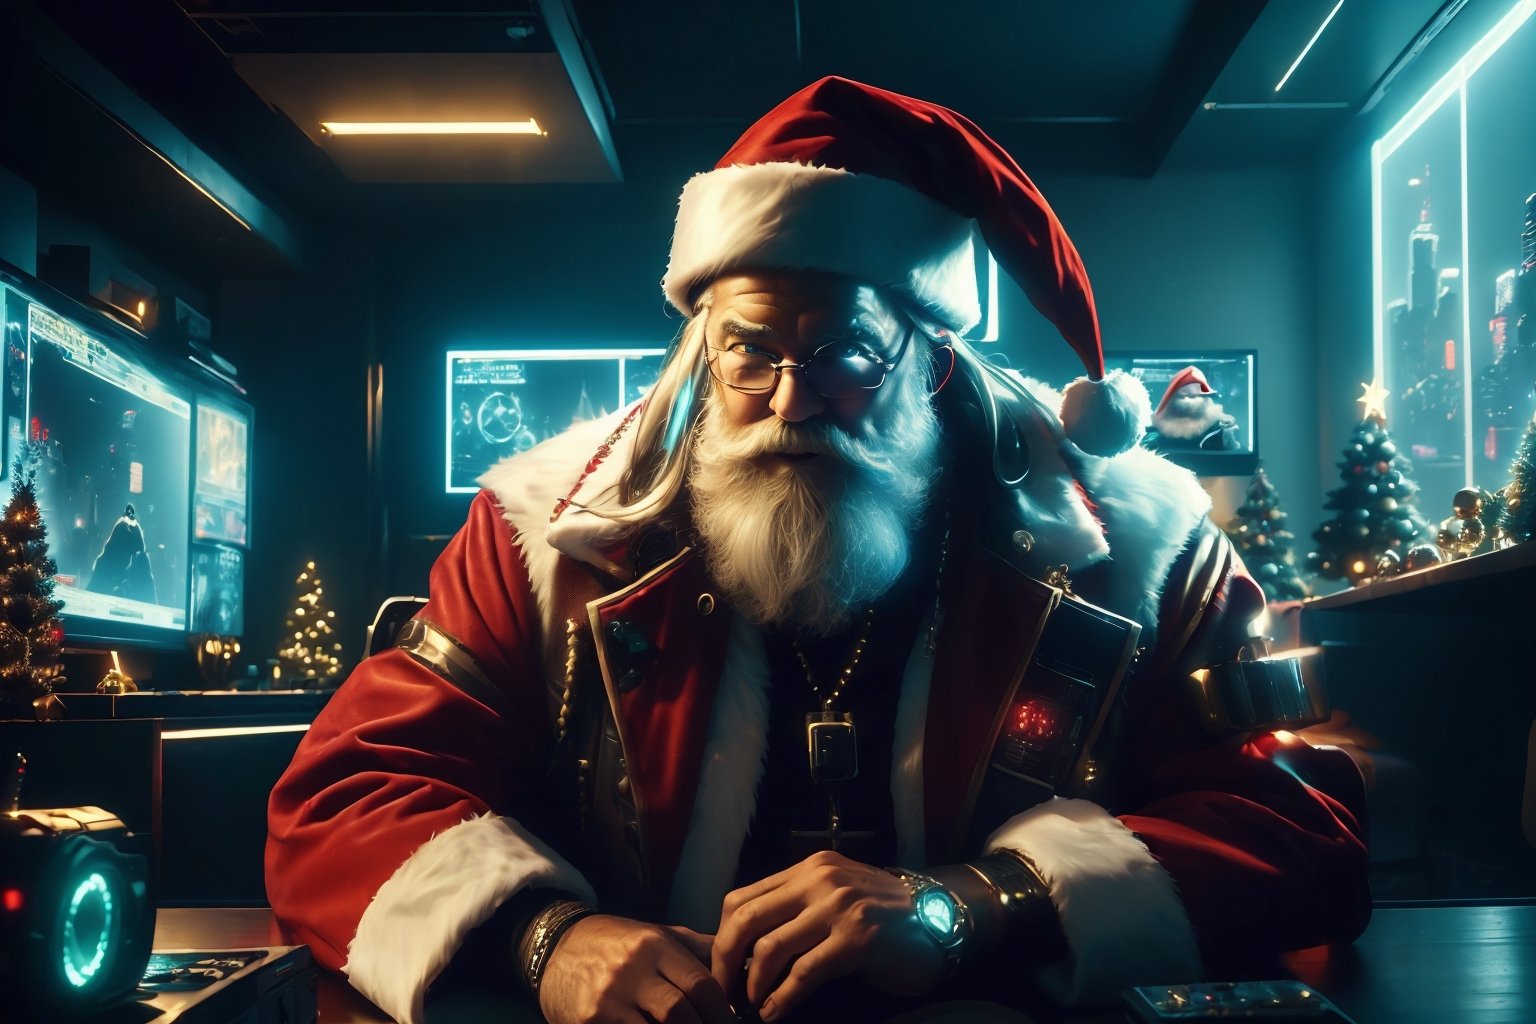 (One Person:1.6), Cyberpunk Santa Claus Sitting in His High-tech House, (Cyberpunk Atmosphere:1.4), (A Christmast Tree and Hall Full of Monitors Inside his House), Insane Details, Intricate Face Detail, Intricate Hand Details, Cinematic Shot and Lighting, Realistic Colors, Masterpiece, Sharp Focus, Highly Detailed, Taken with DSLR Camera, Realistic Photography, Depth of Field, Incredibly Realistic Environment and Scene, Master Composition and Cinematography, Santa Claus,C7b3rp0nkStyle